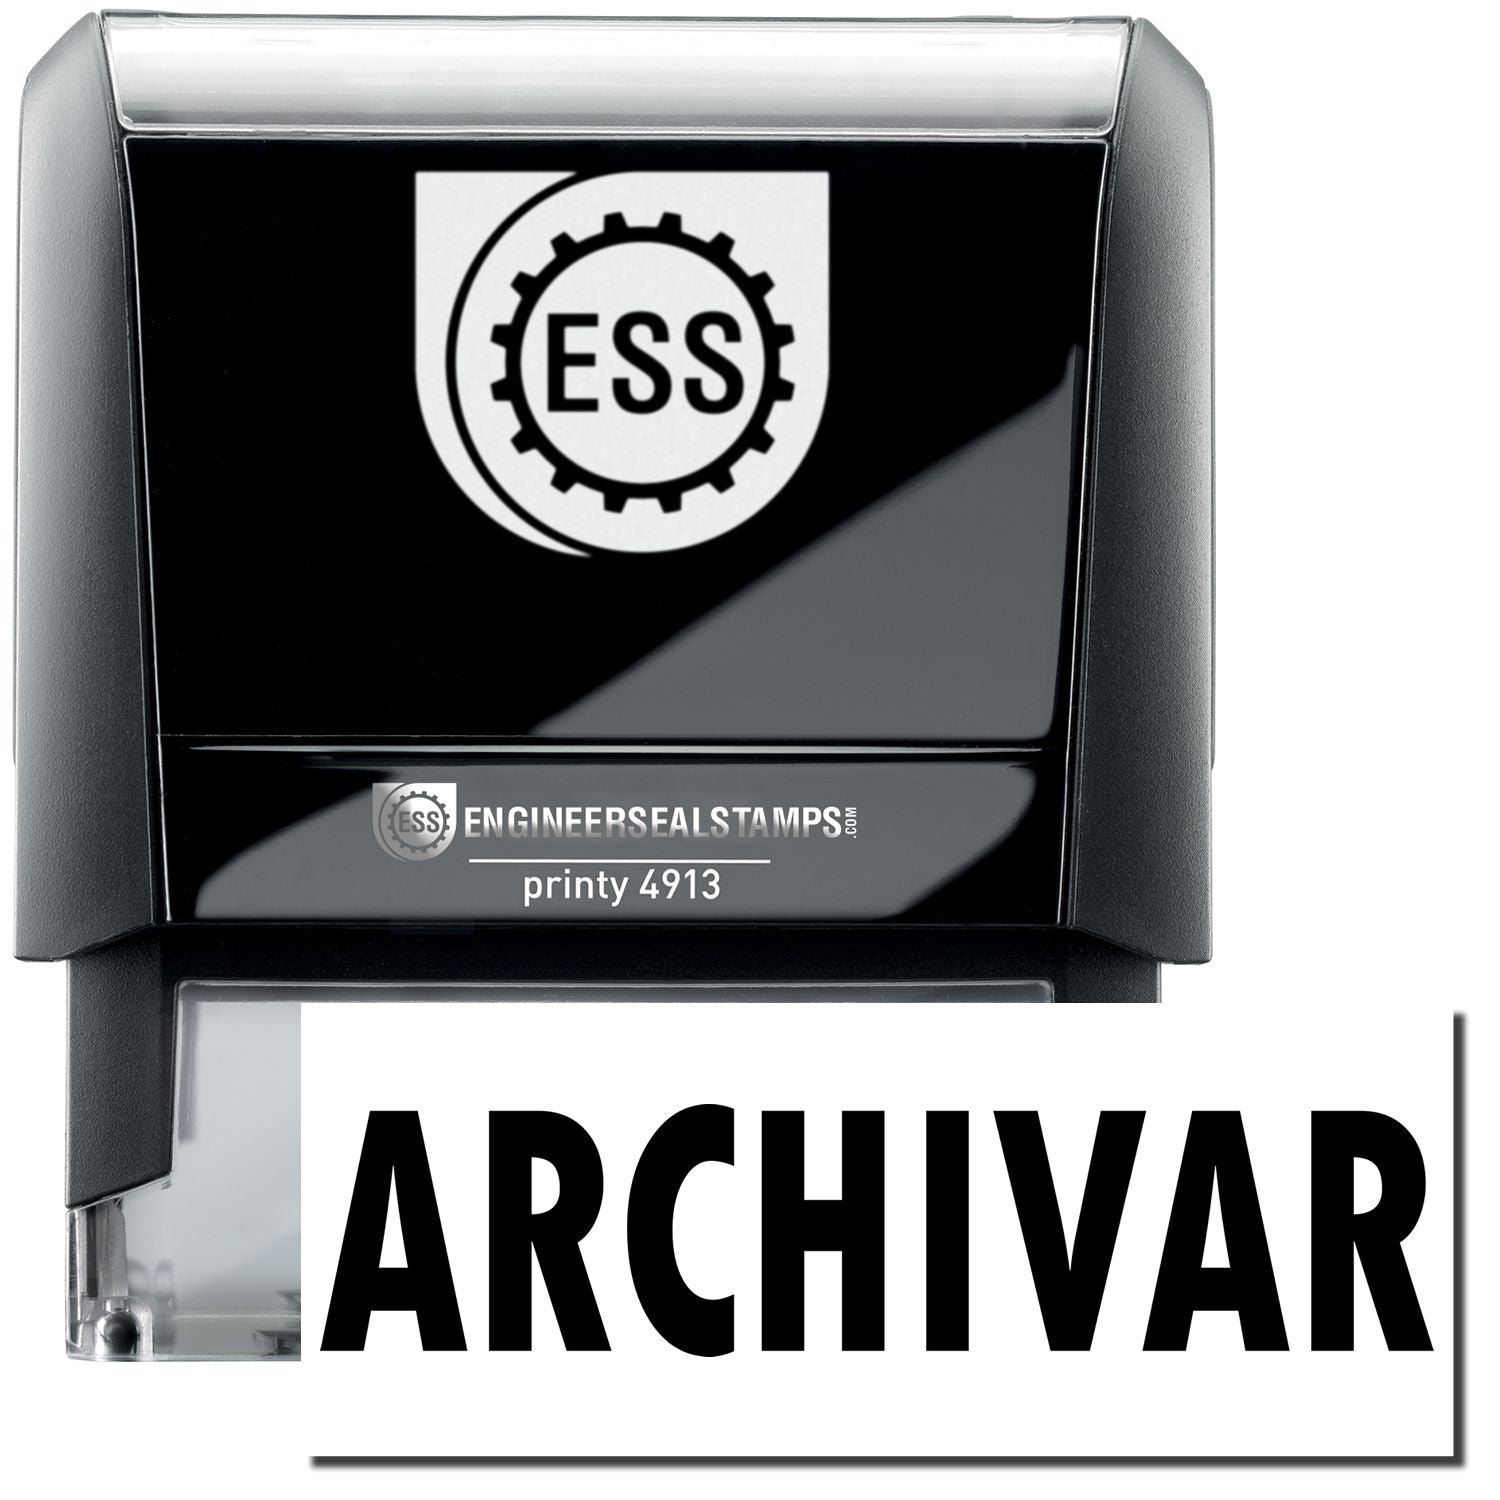 A self-inking stamp with a stamped image showing how the text "ARCHIVAR" in a large font is displayed by it after stamping.